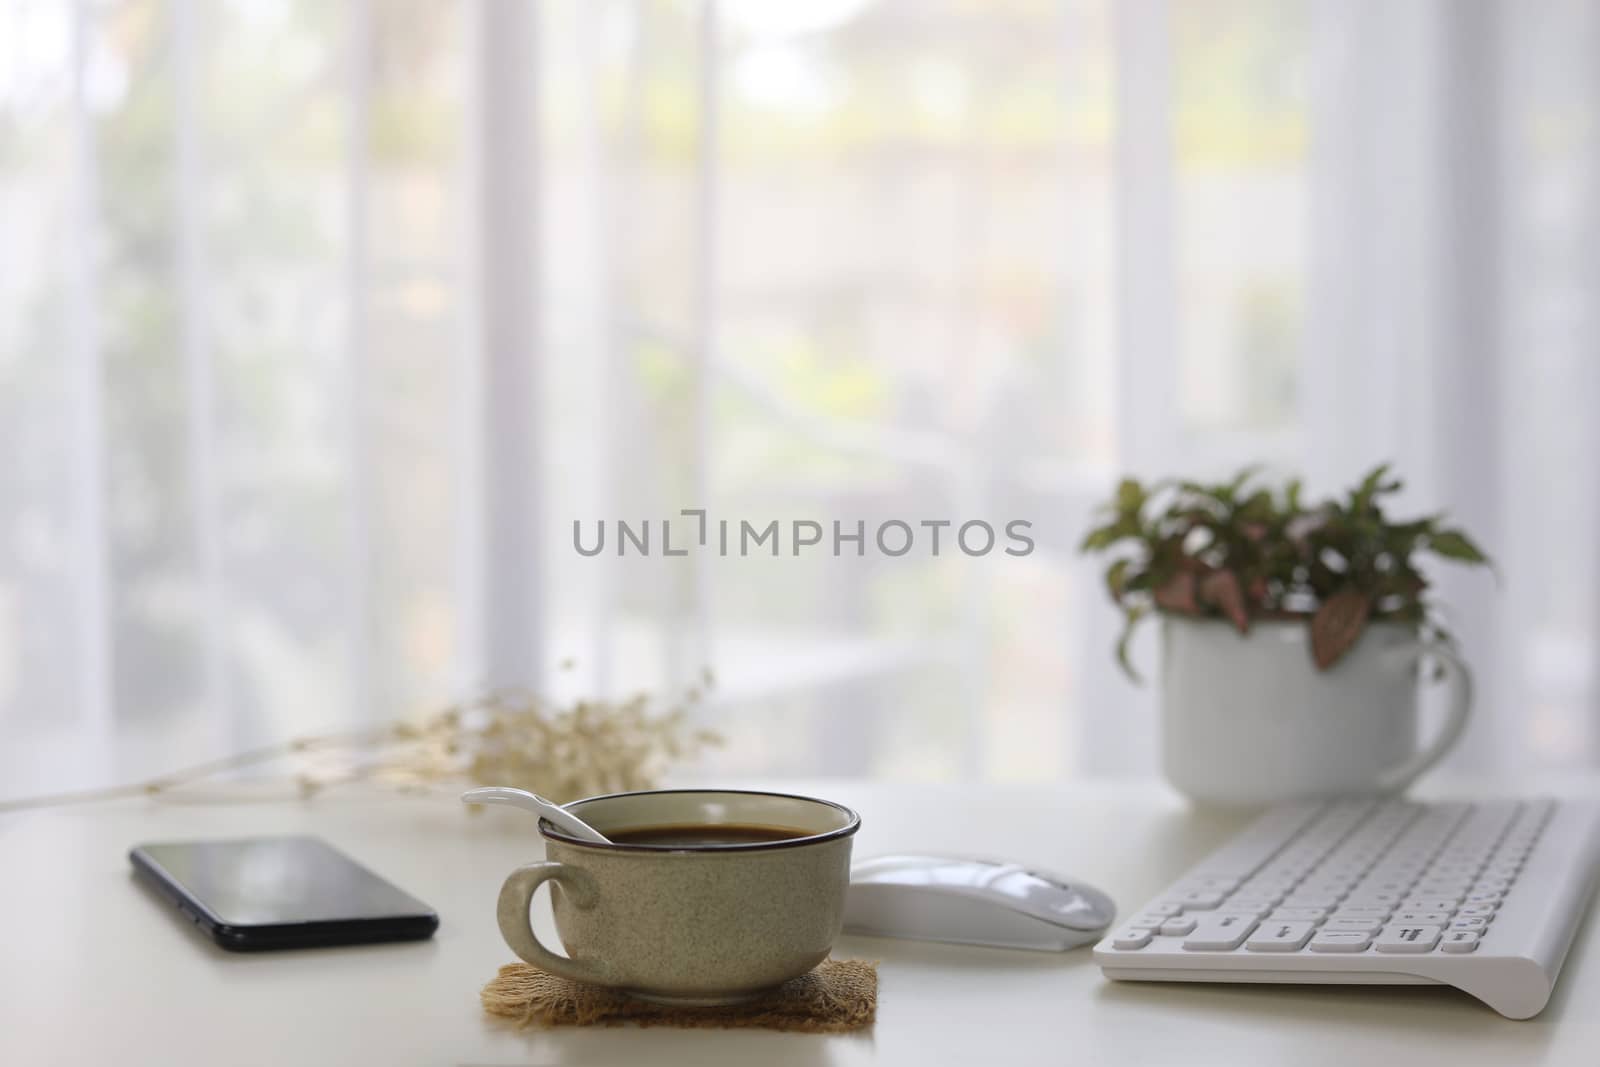 Interior house modern decor with smartphone coffee and white keaboard and mouse and plants pot with see through curtain